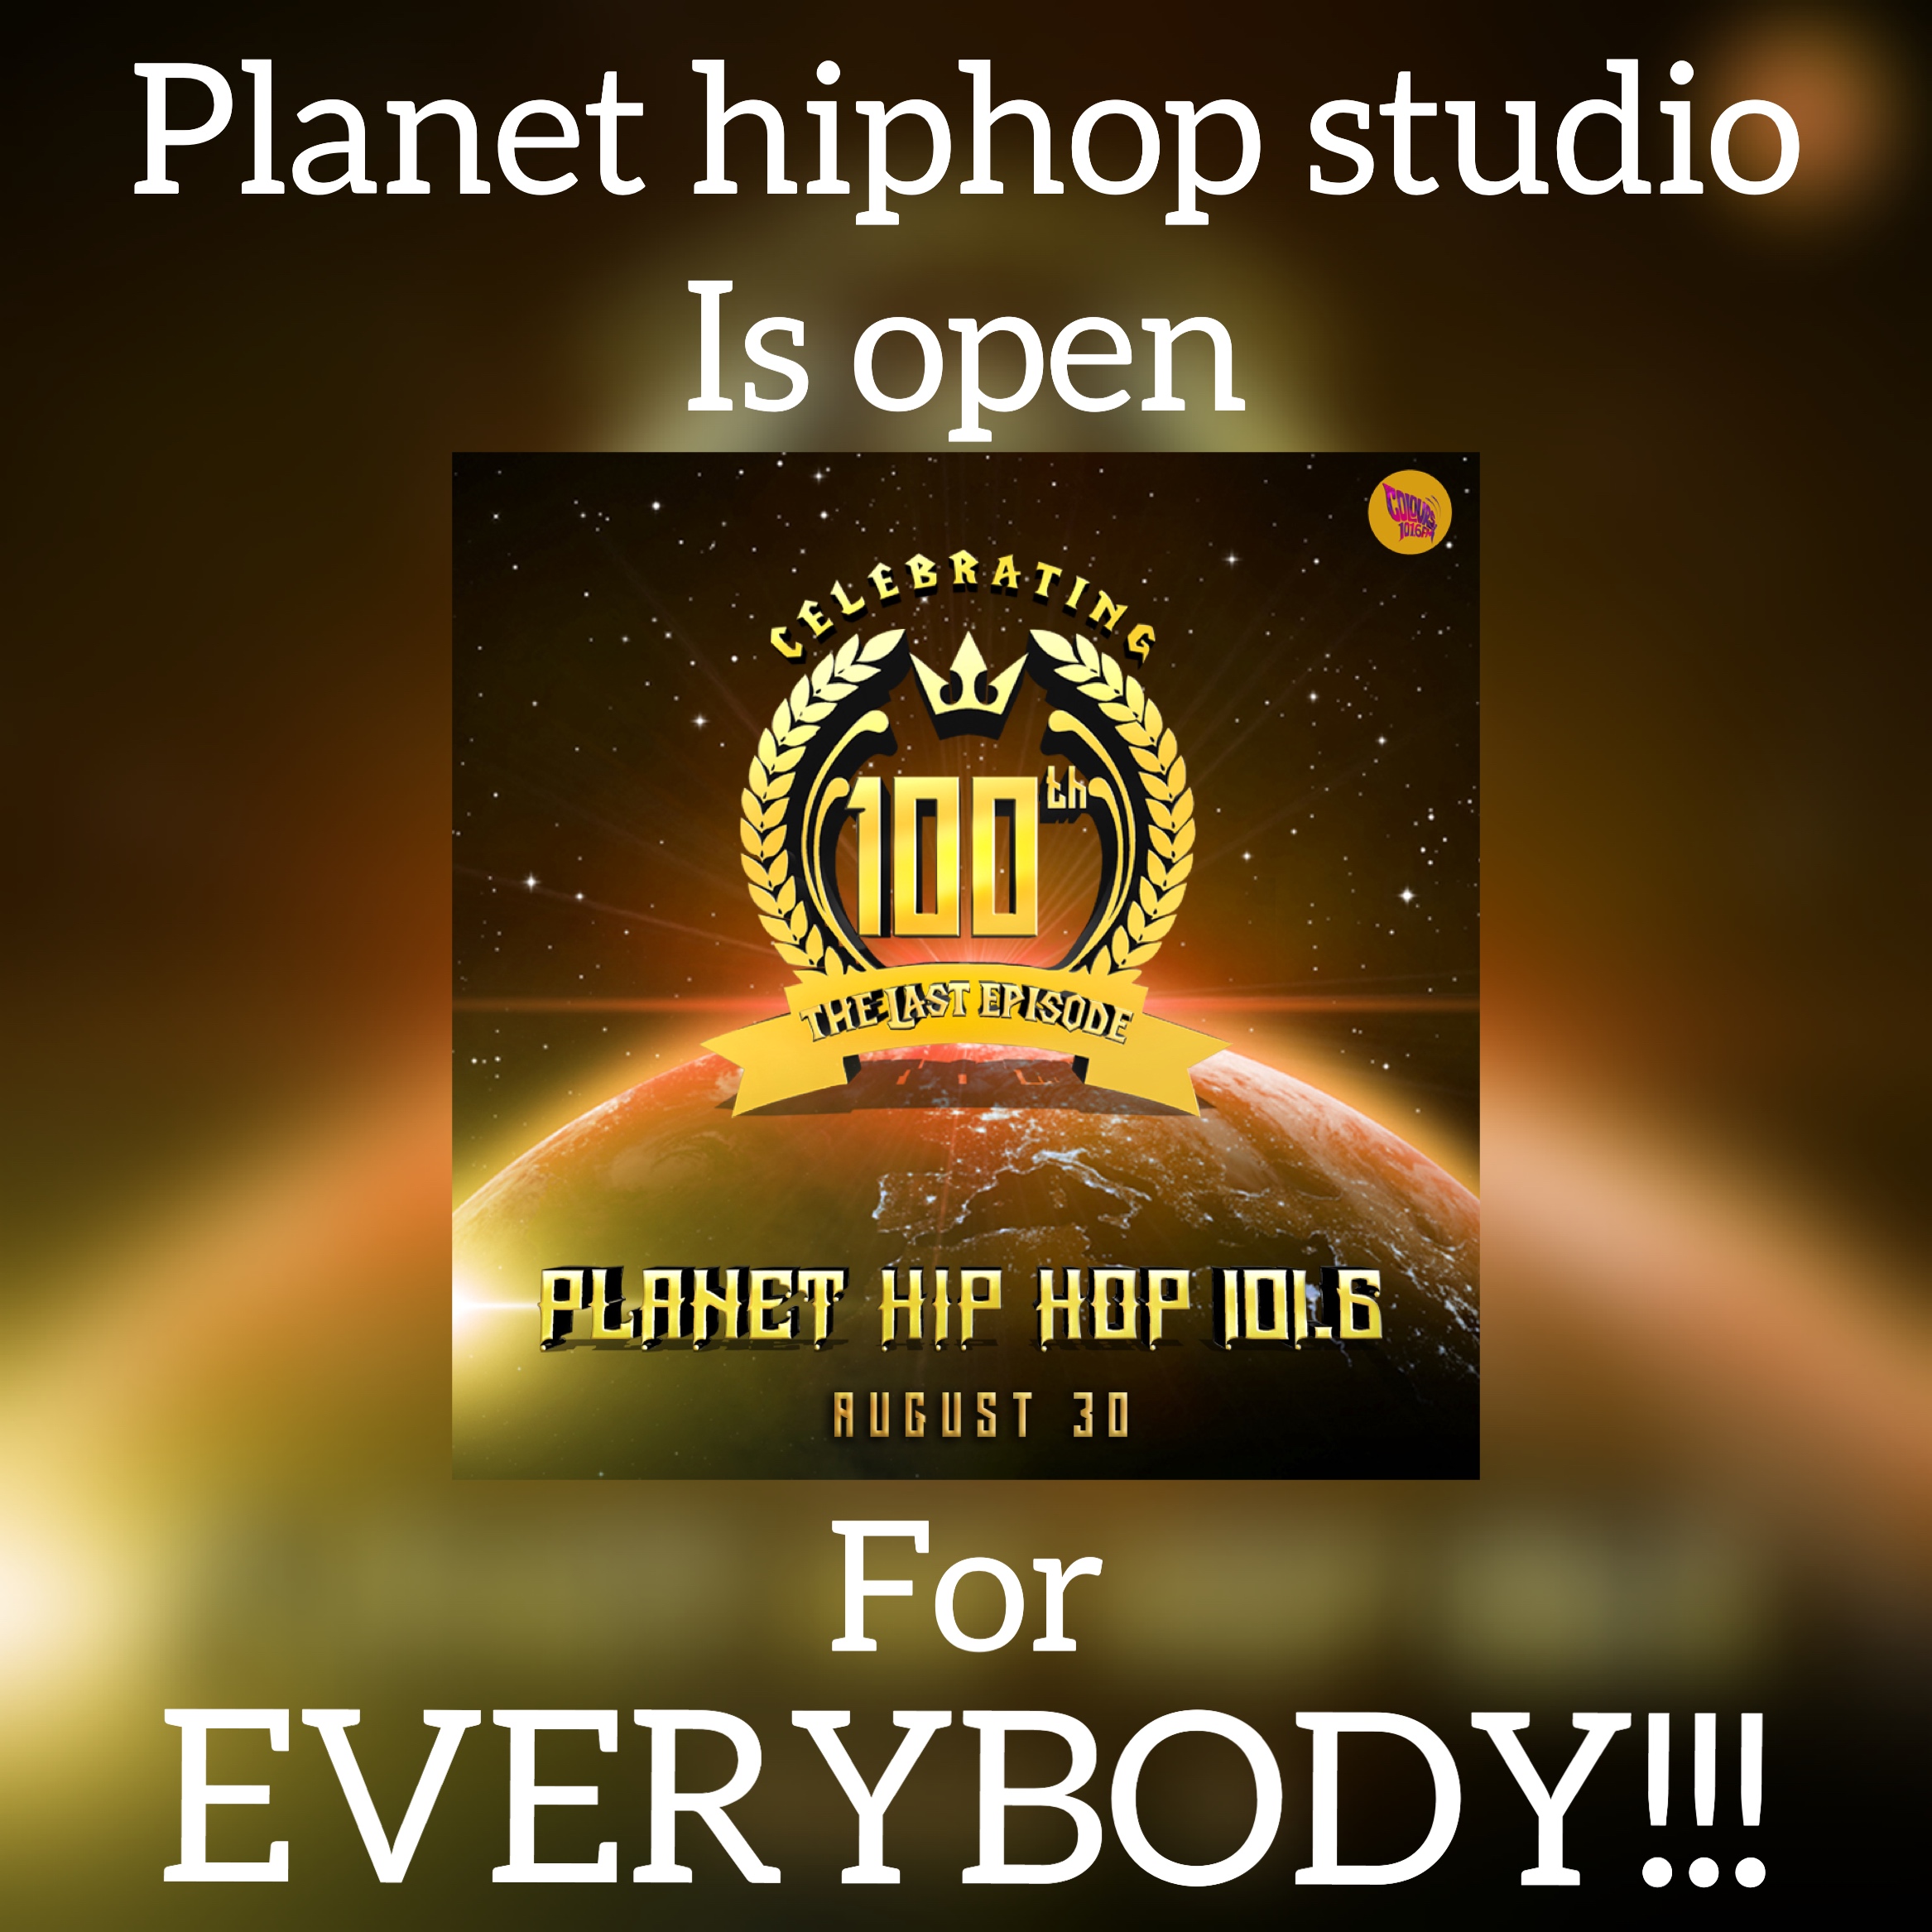 Planet hiphop studio is open for all on 30th August. 